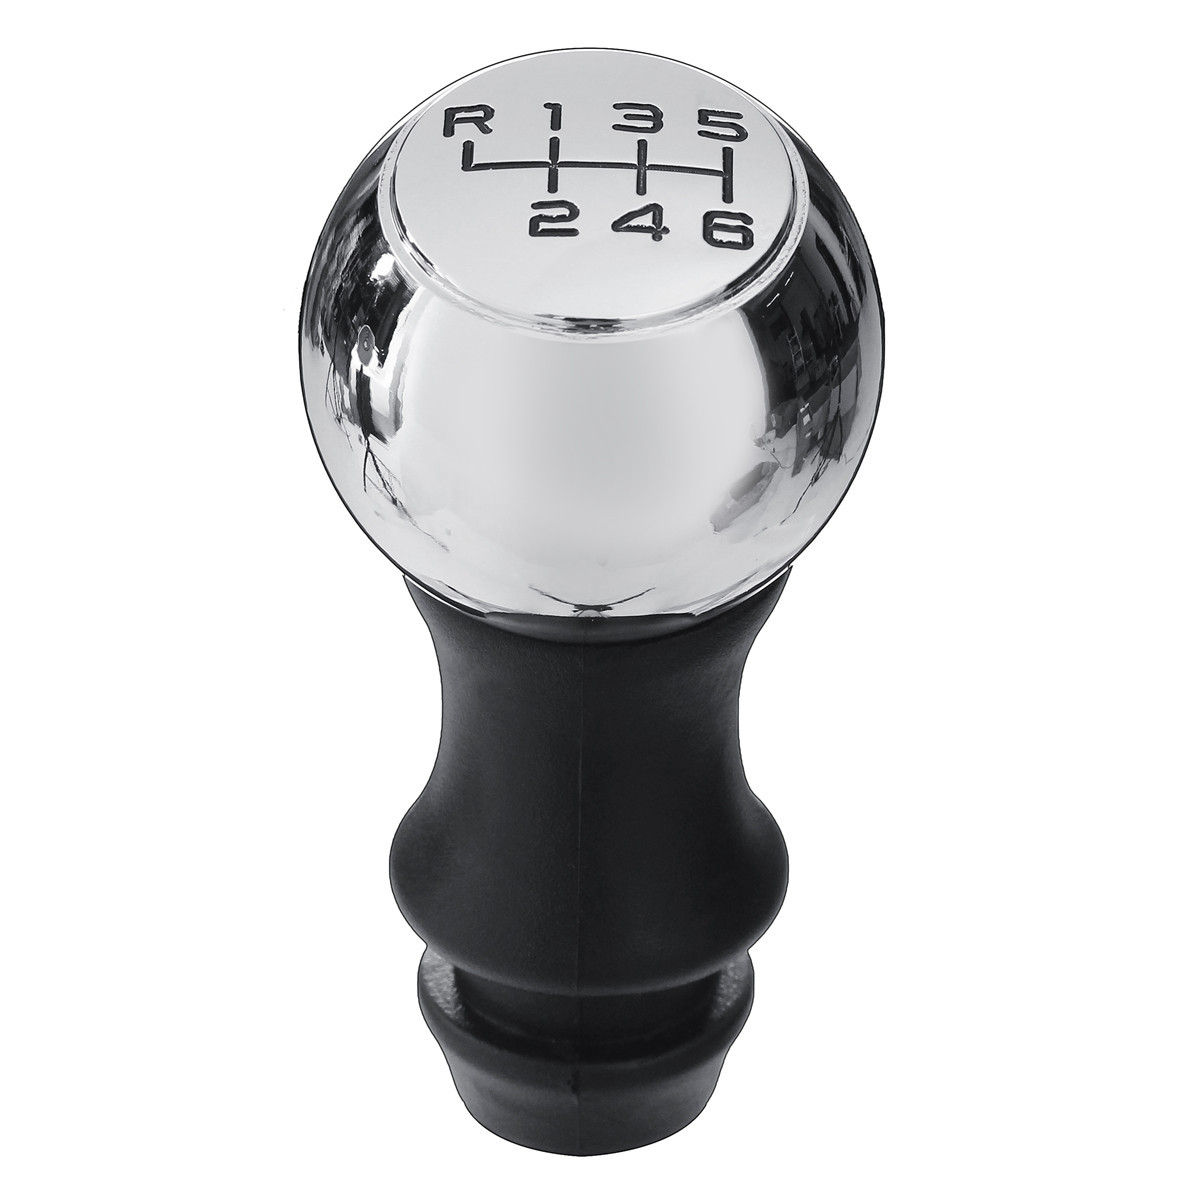 6 Speed Gear Shift Knob Manual Stick For Peugeot 307 308 408 2008 206 207 208 2